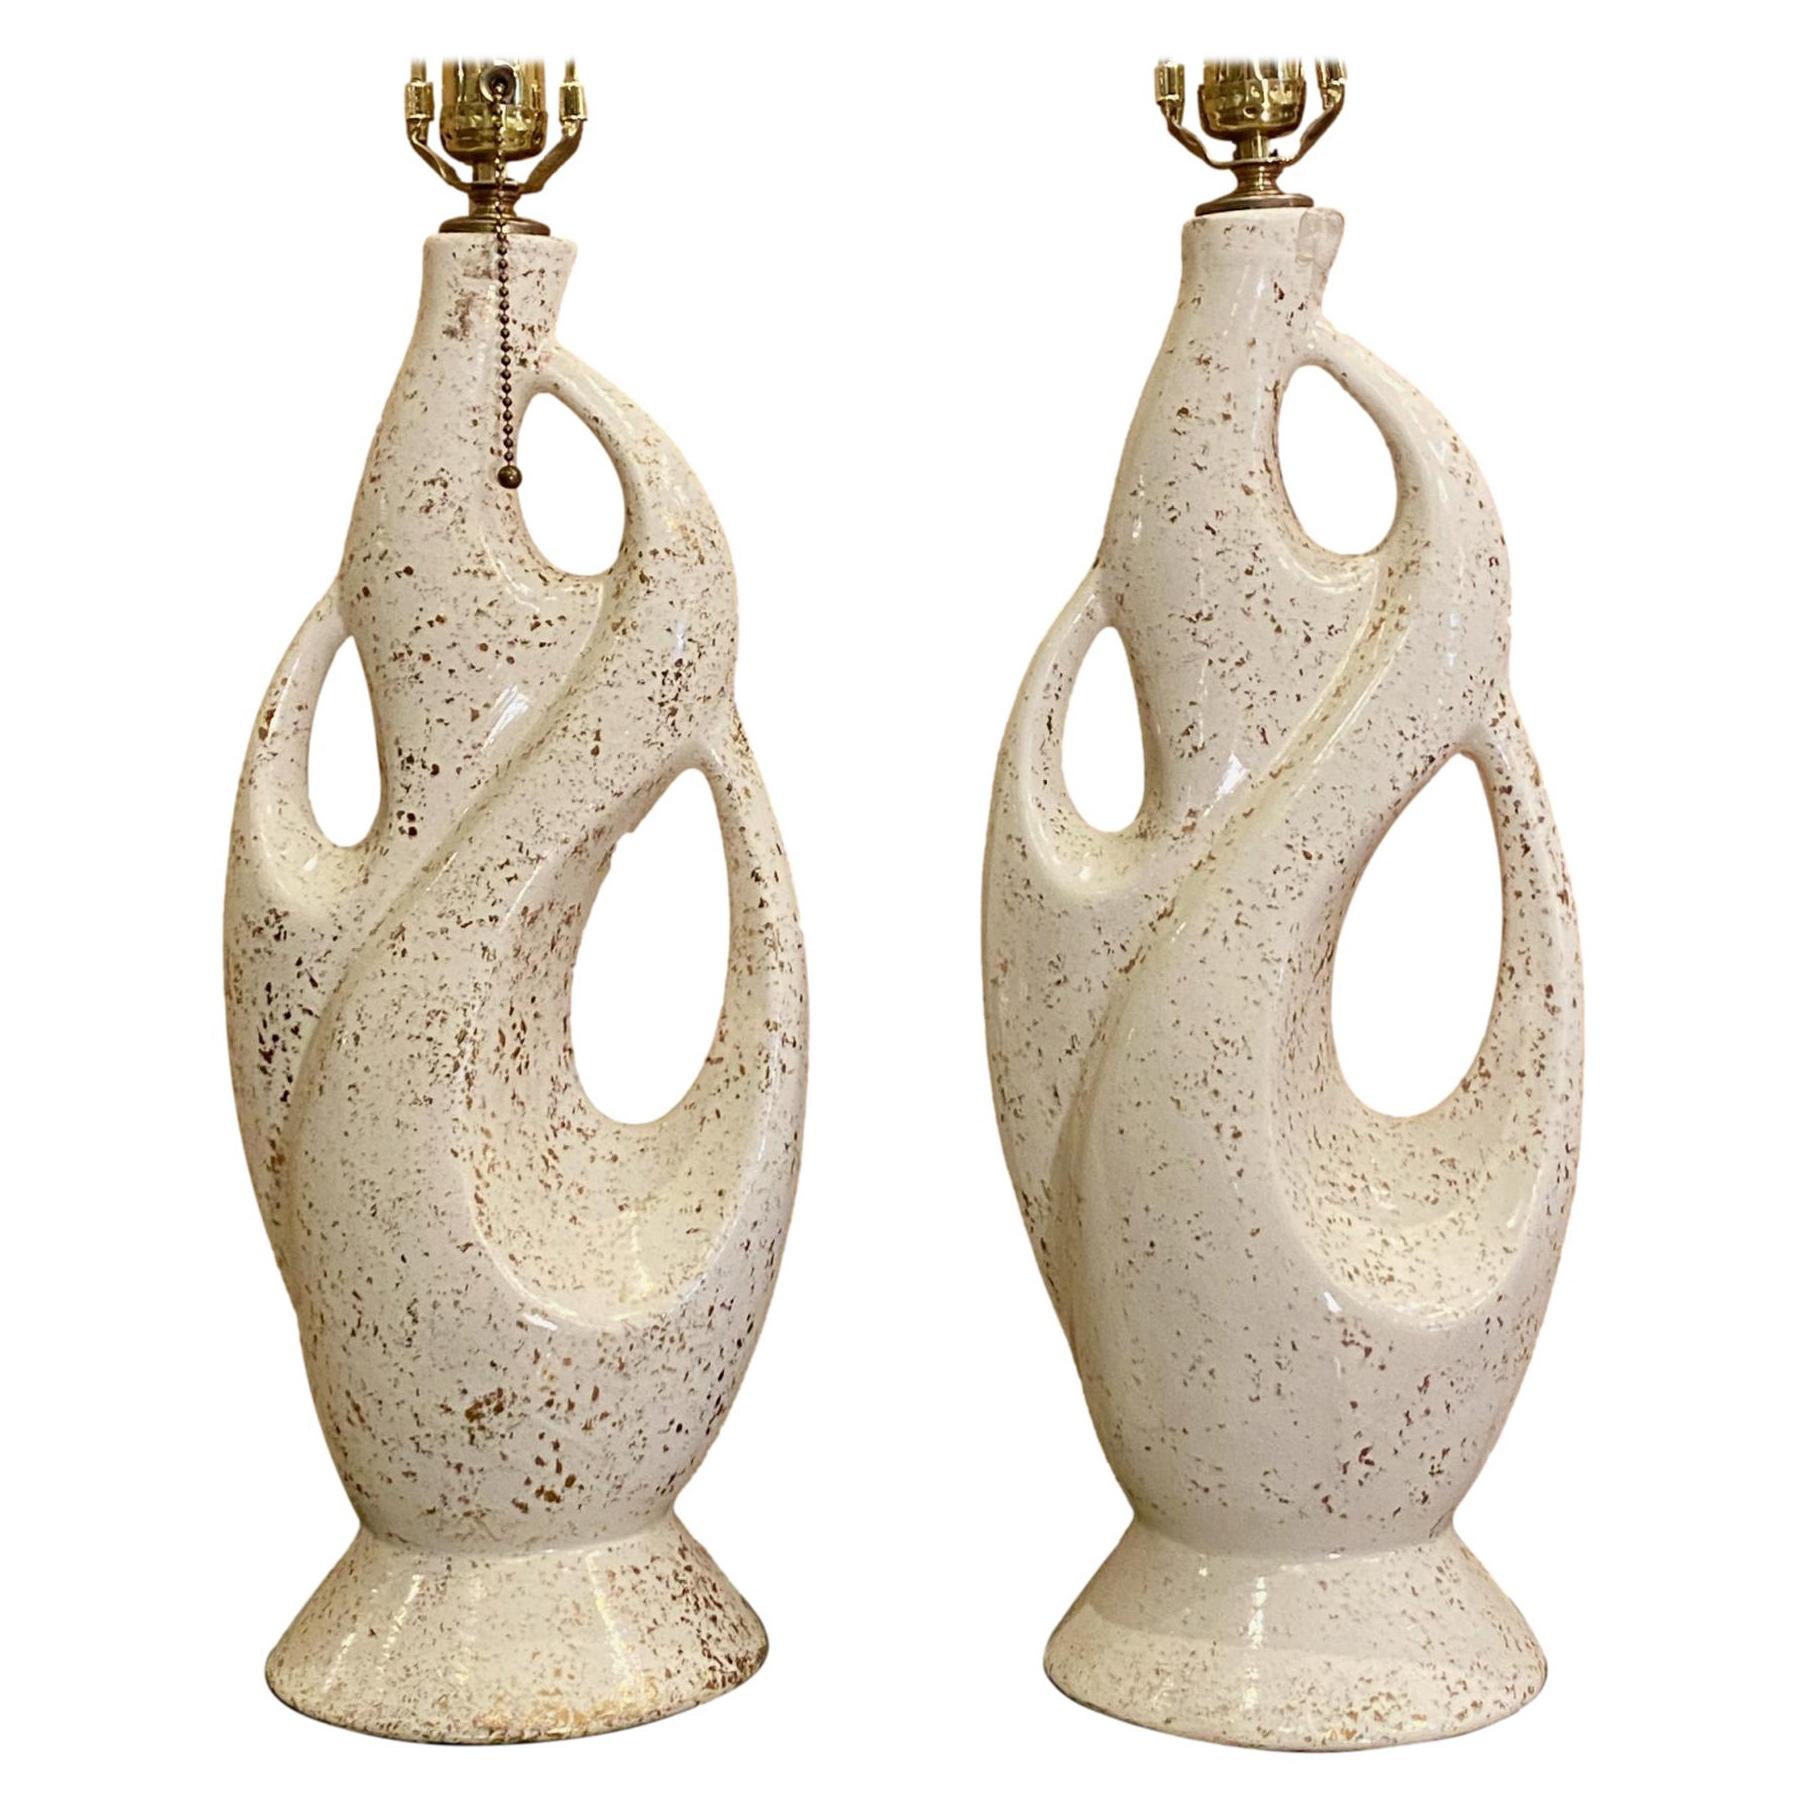 Pair of Moderne Porcelain Table Lamps